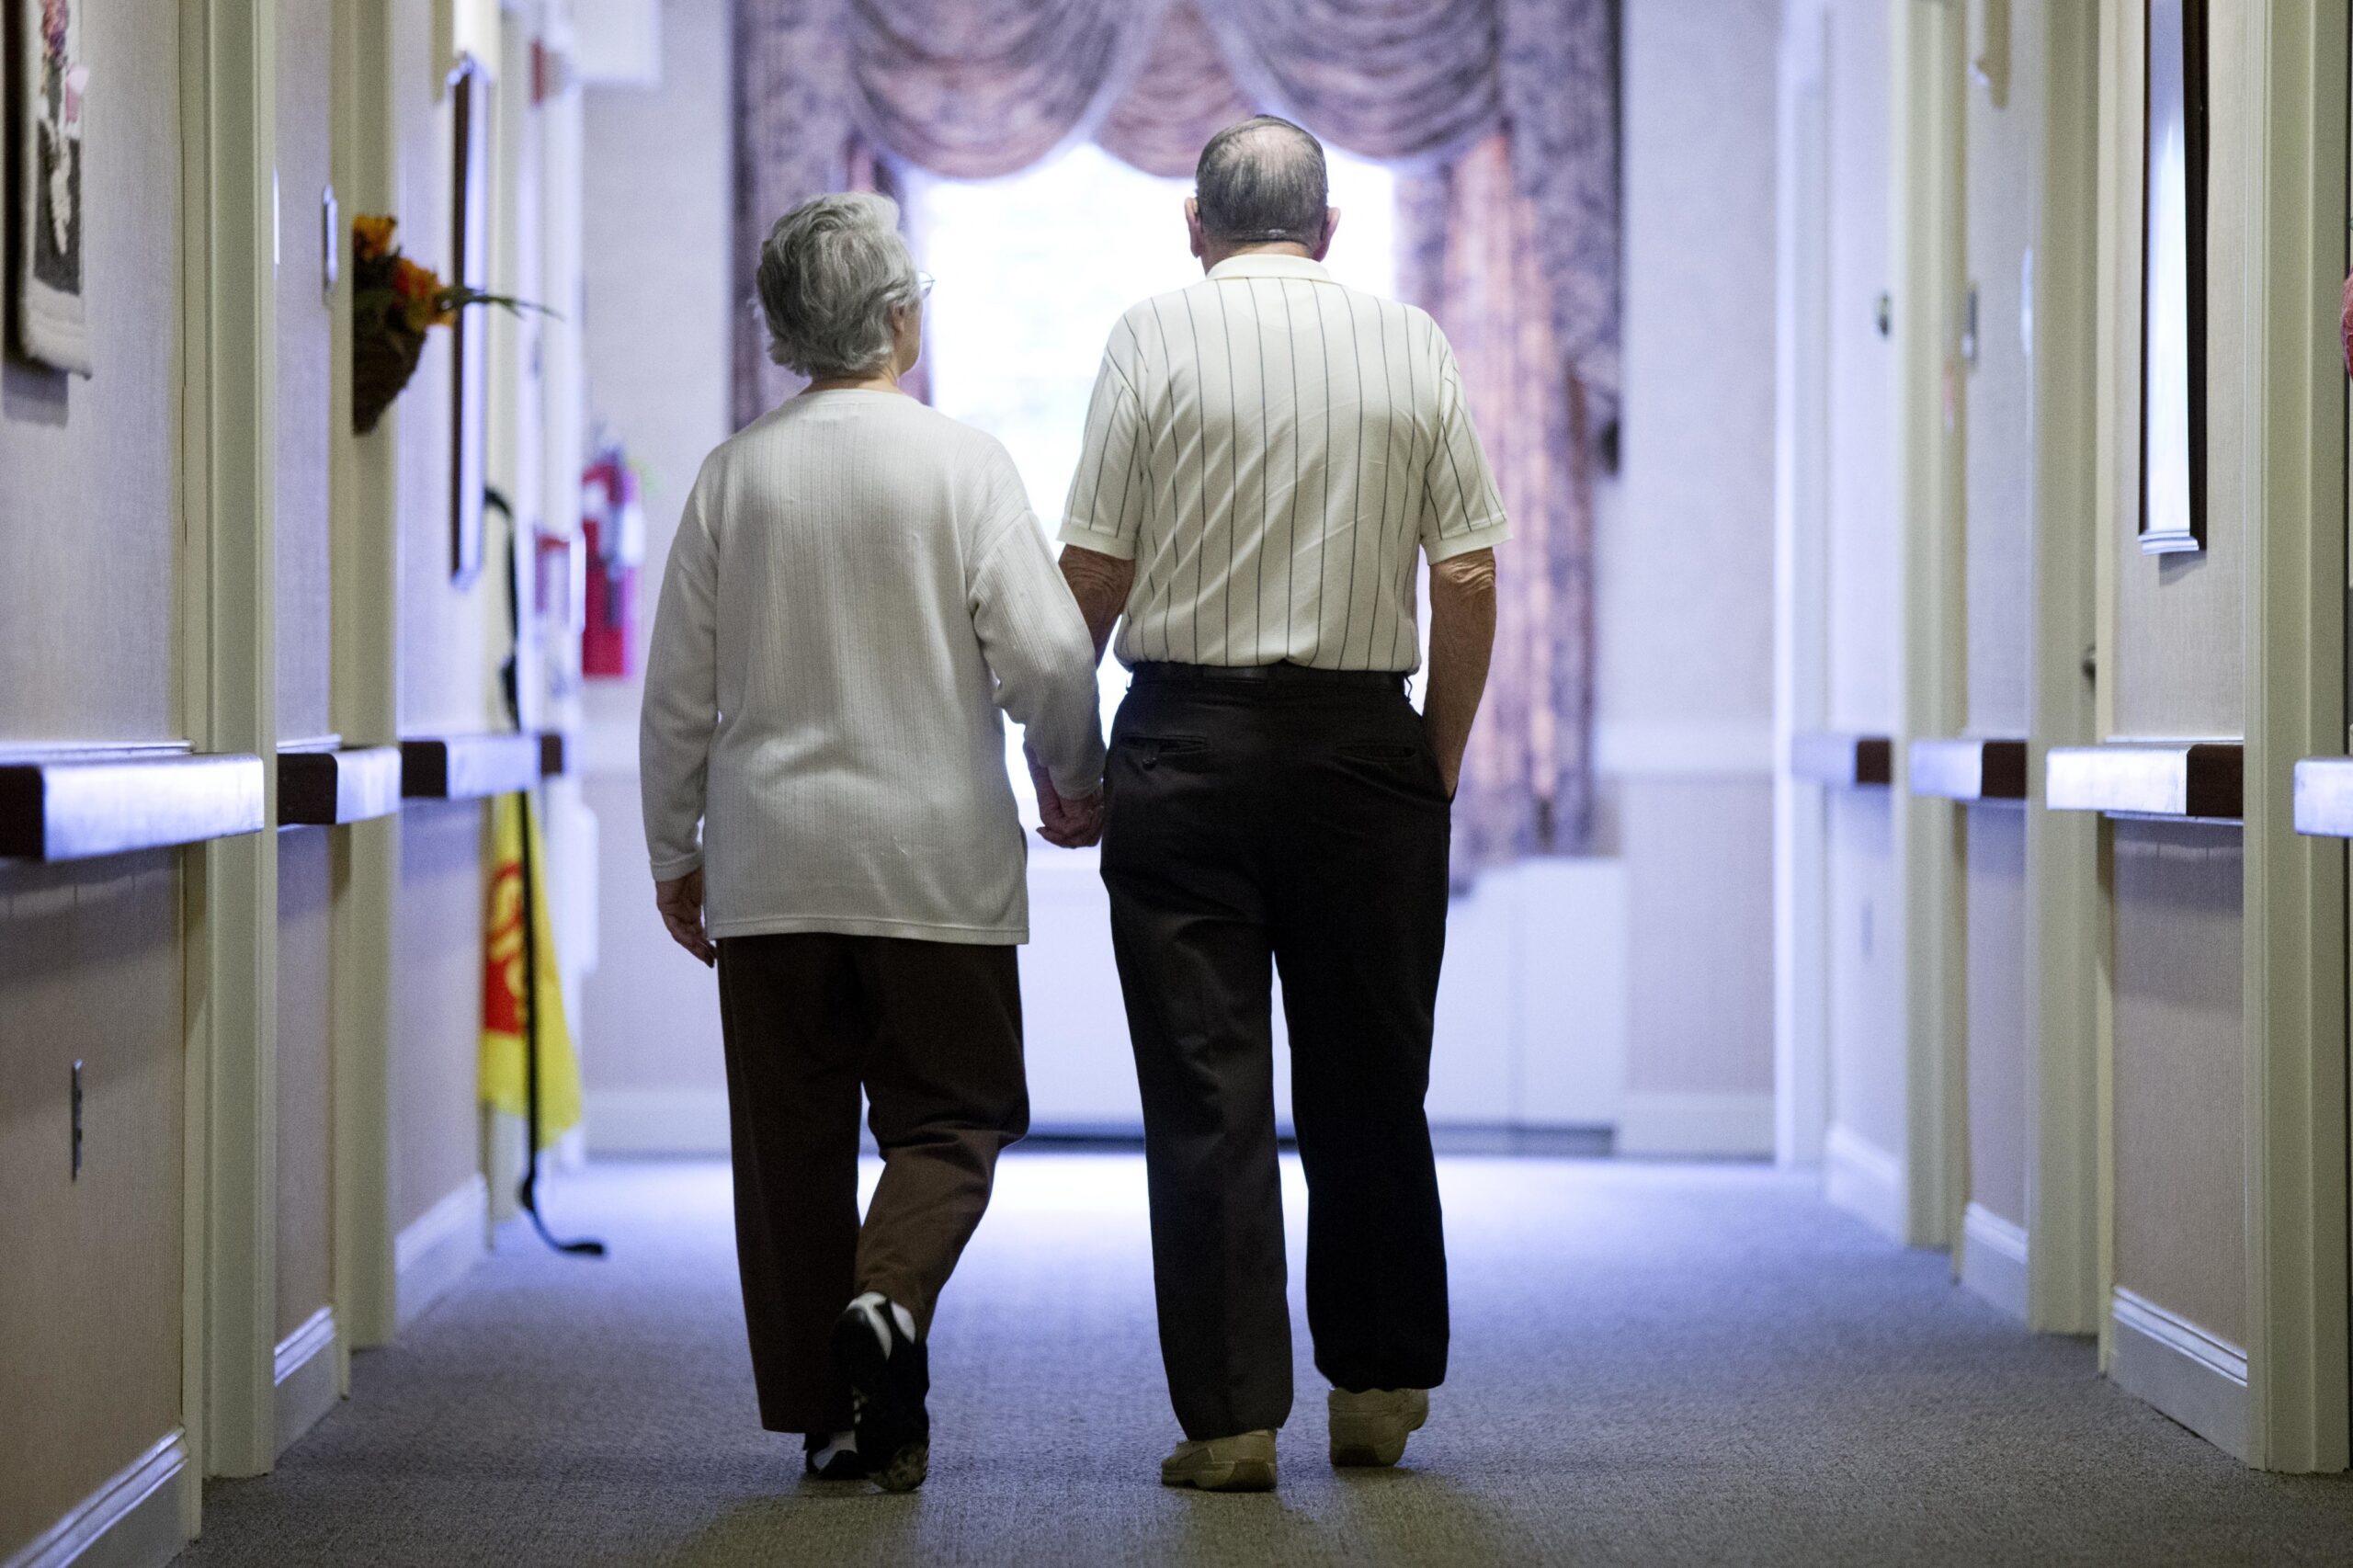 State bill would require long-term care facilities evicting residents to give more notice